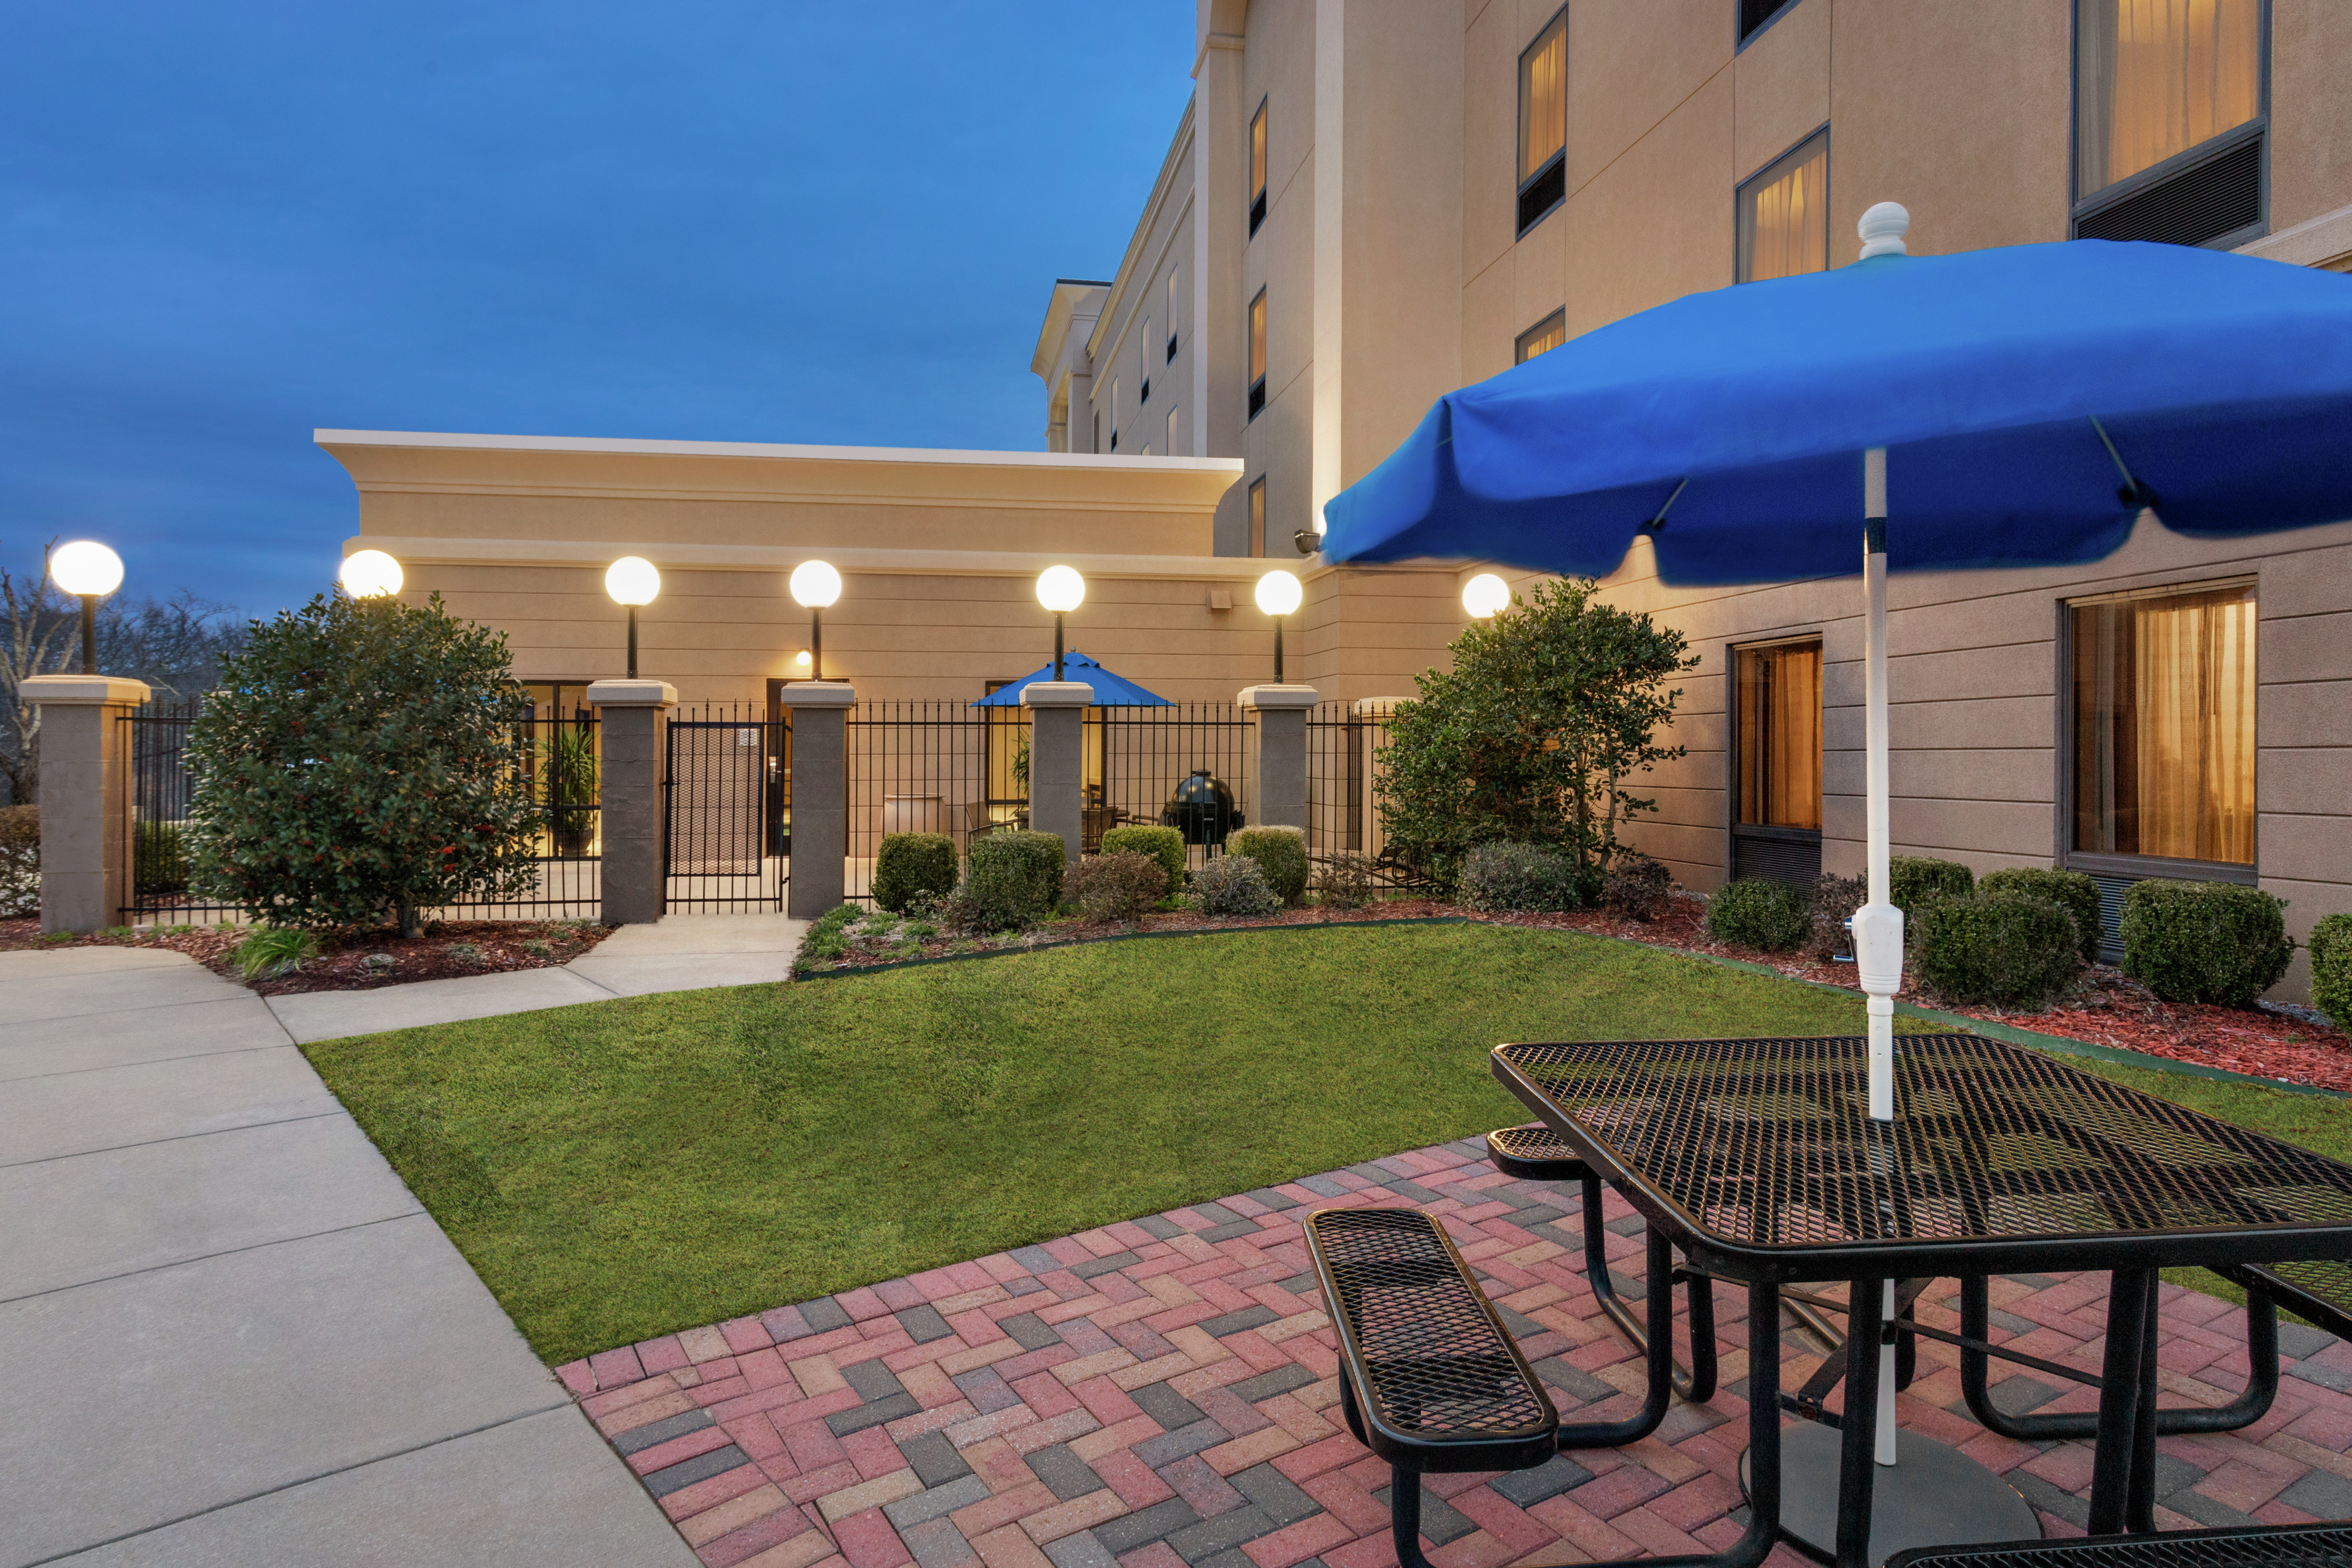 Spacious outdoor patio area featuring lush landscaping, glowing guest room windows, and beautiful dusk sky.